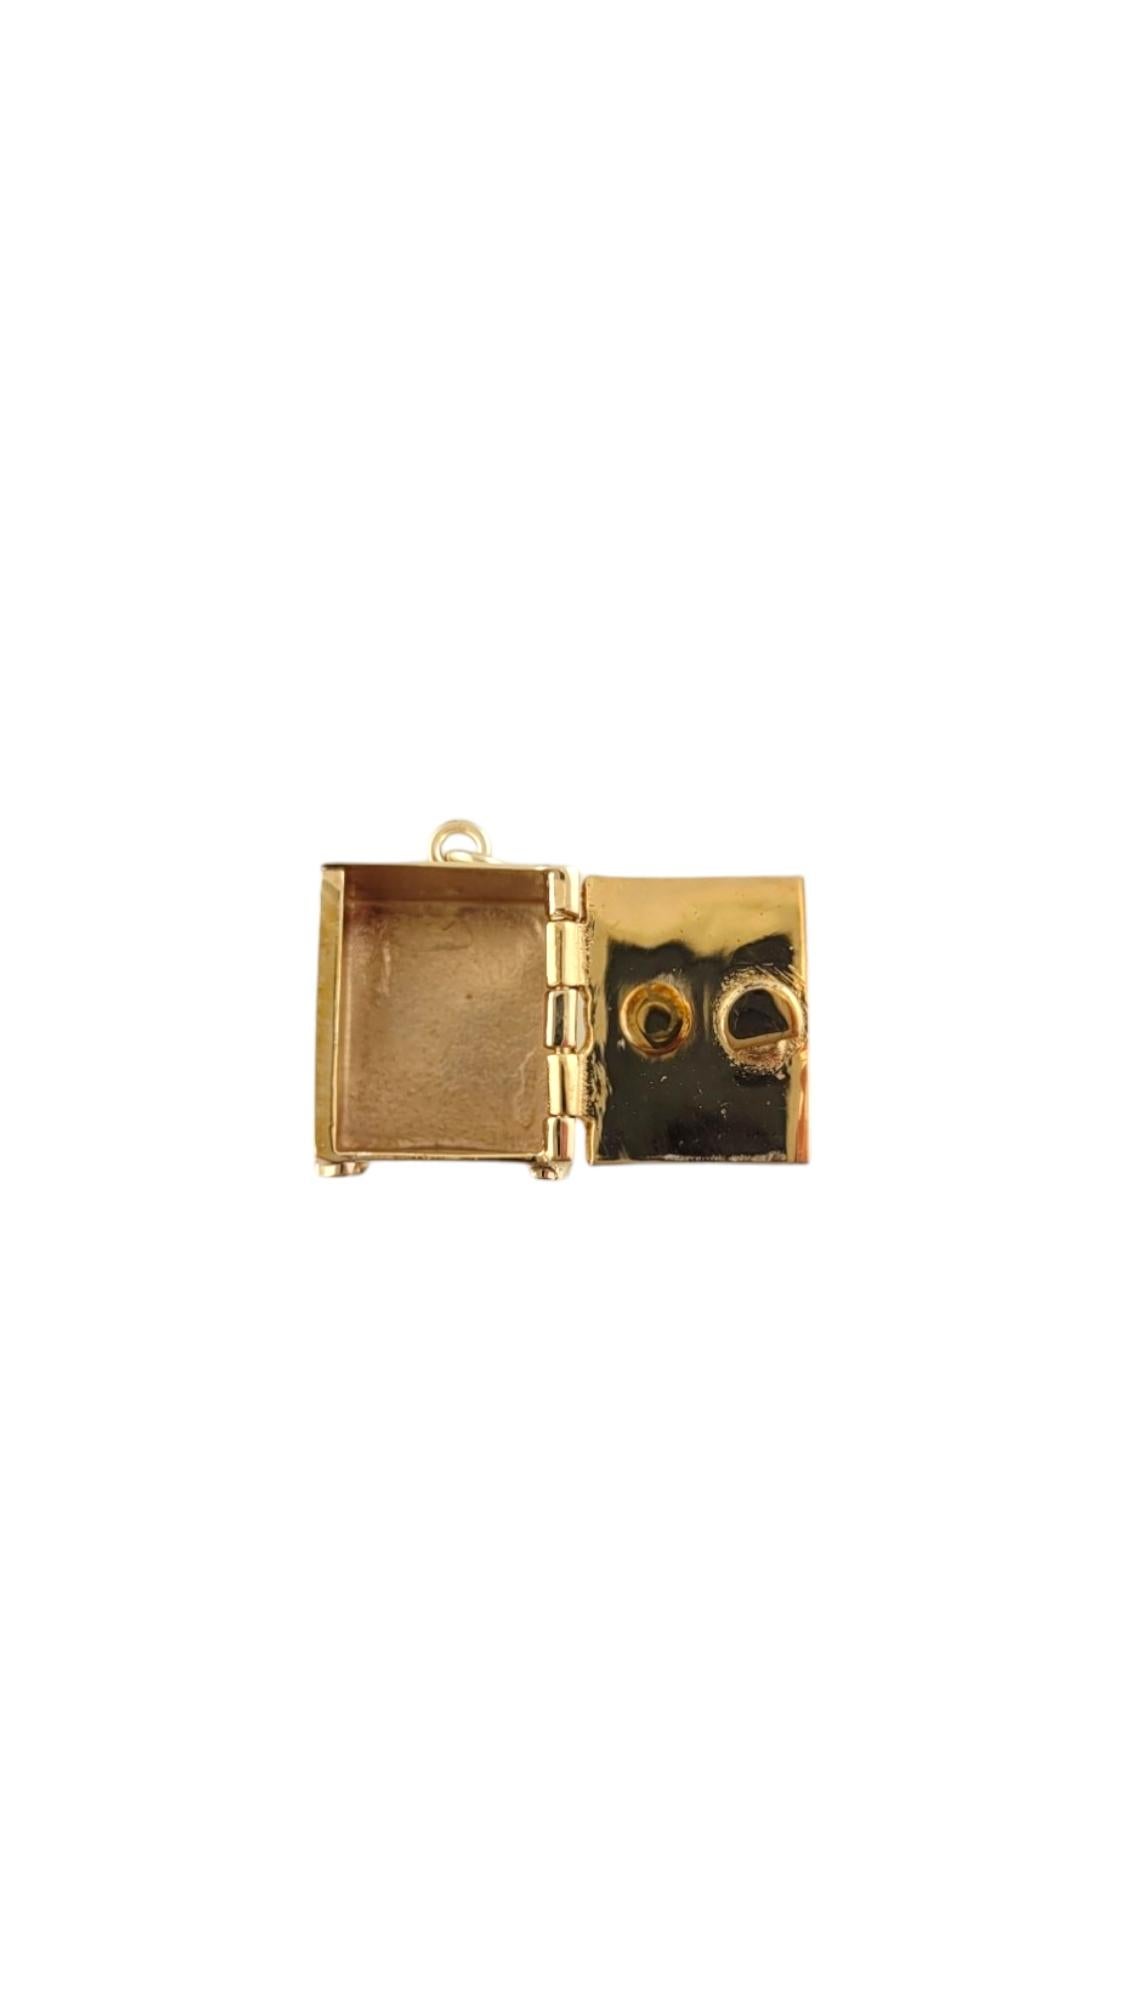 14K Yellow Gold Articulating Safe Charm #16790 In Good Condition For Sale In Washington Depot, CT